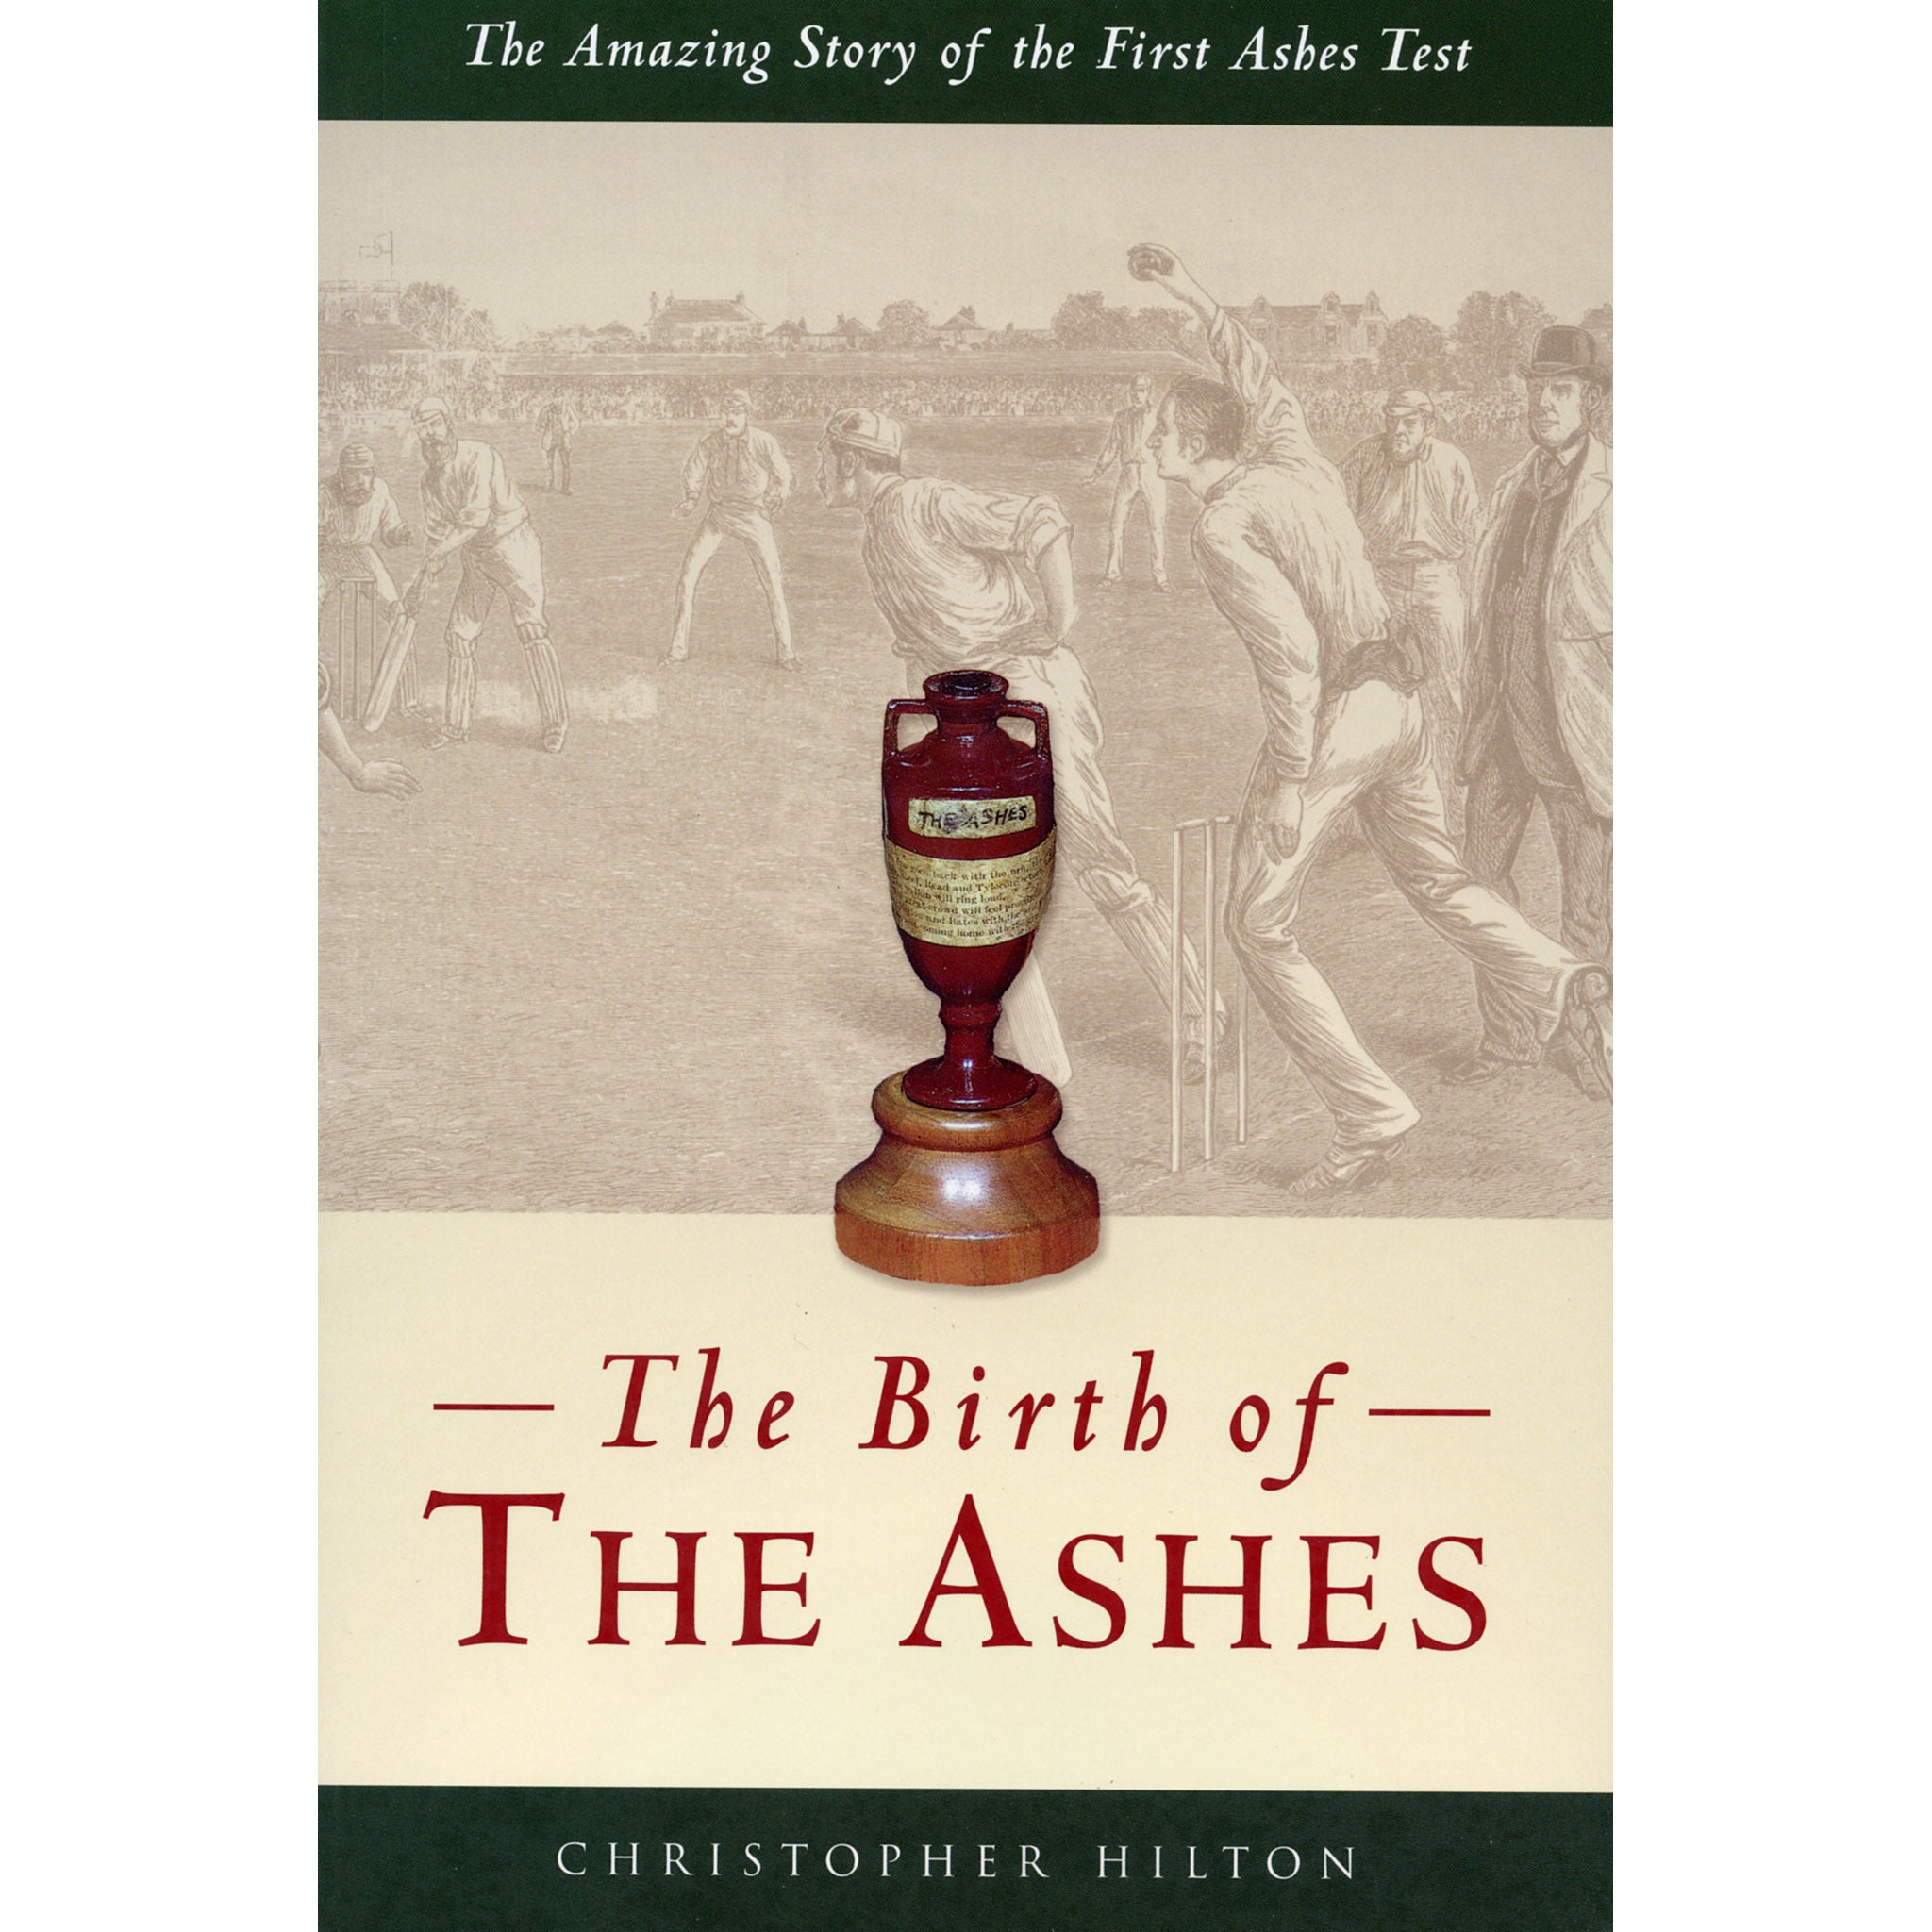 The Birth of the Ashes – The Amazing Story of the First Ashes Test